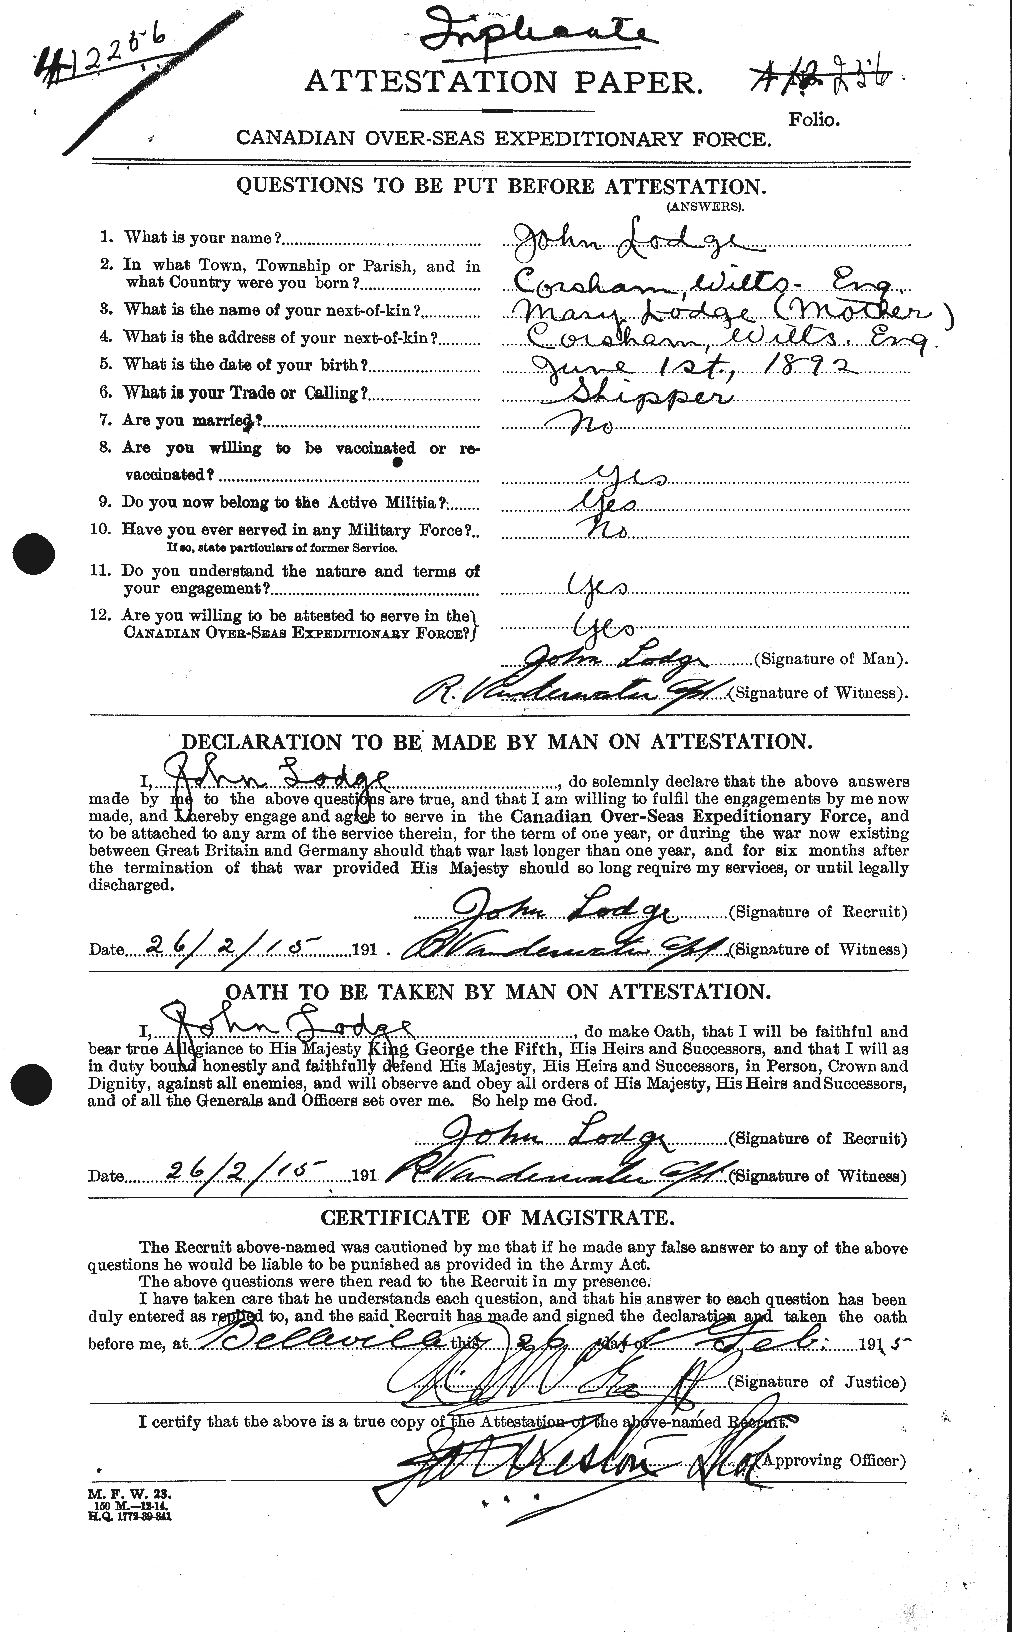 Personnel Records of the First World War - CEF 464811a